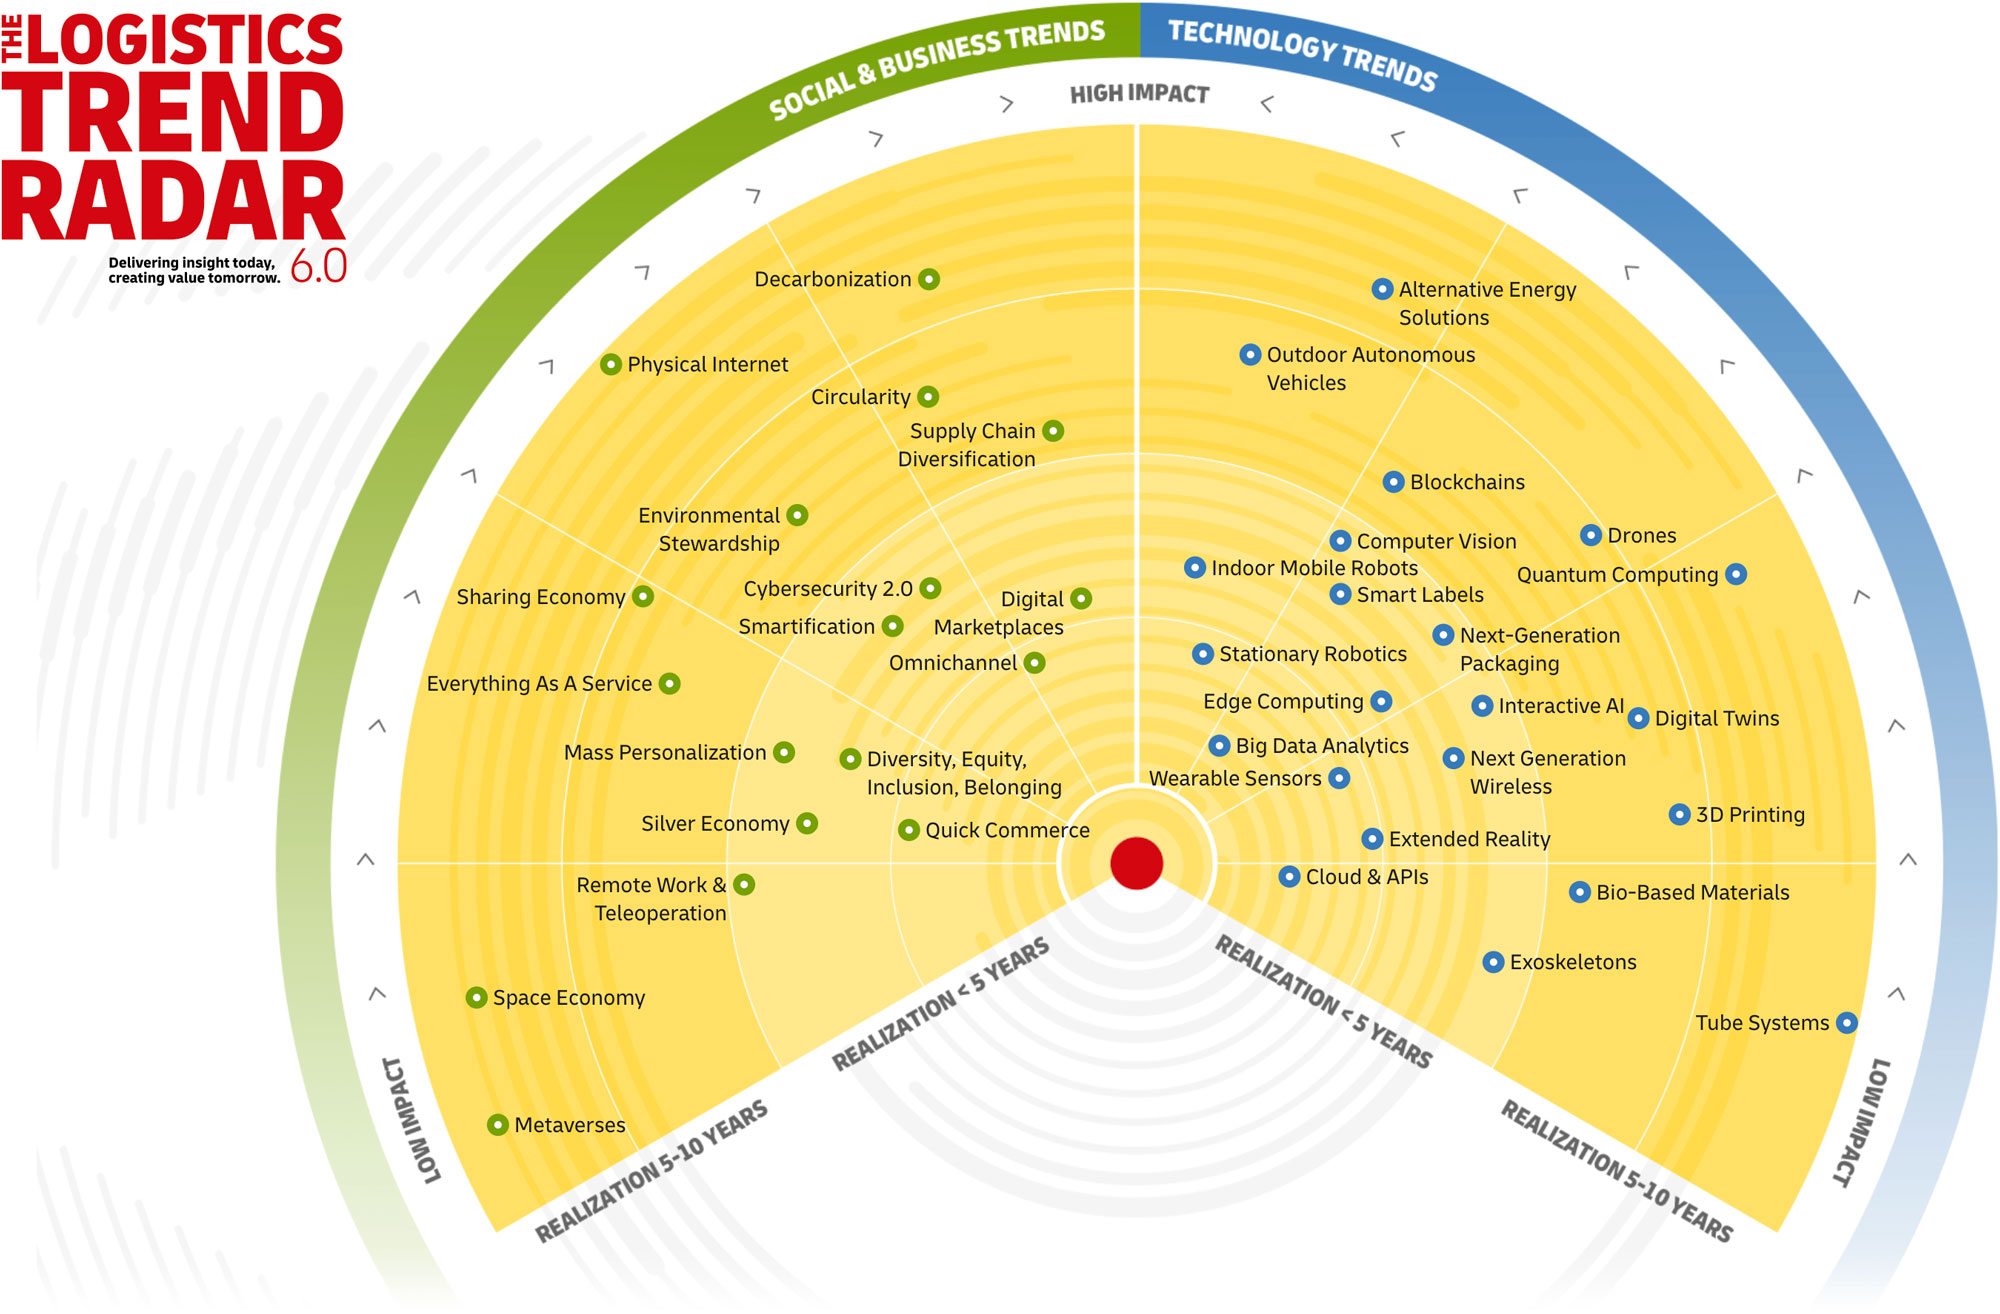 The Logistics Trend Radar 6.0 - Delivering insight today, creating value tomorrow